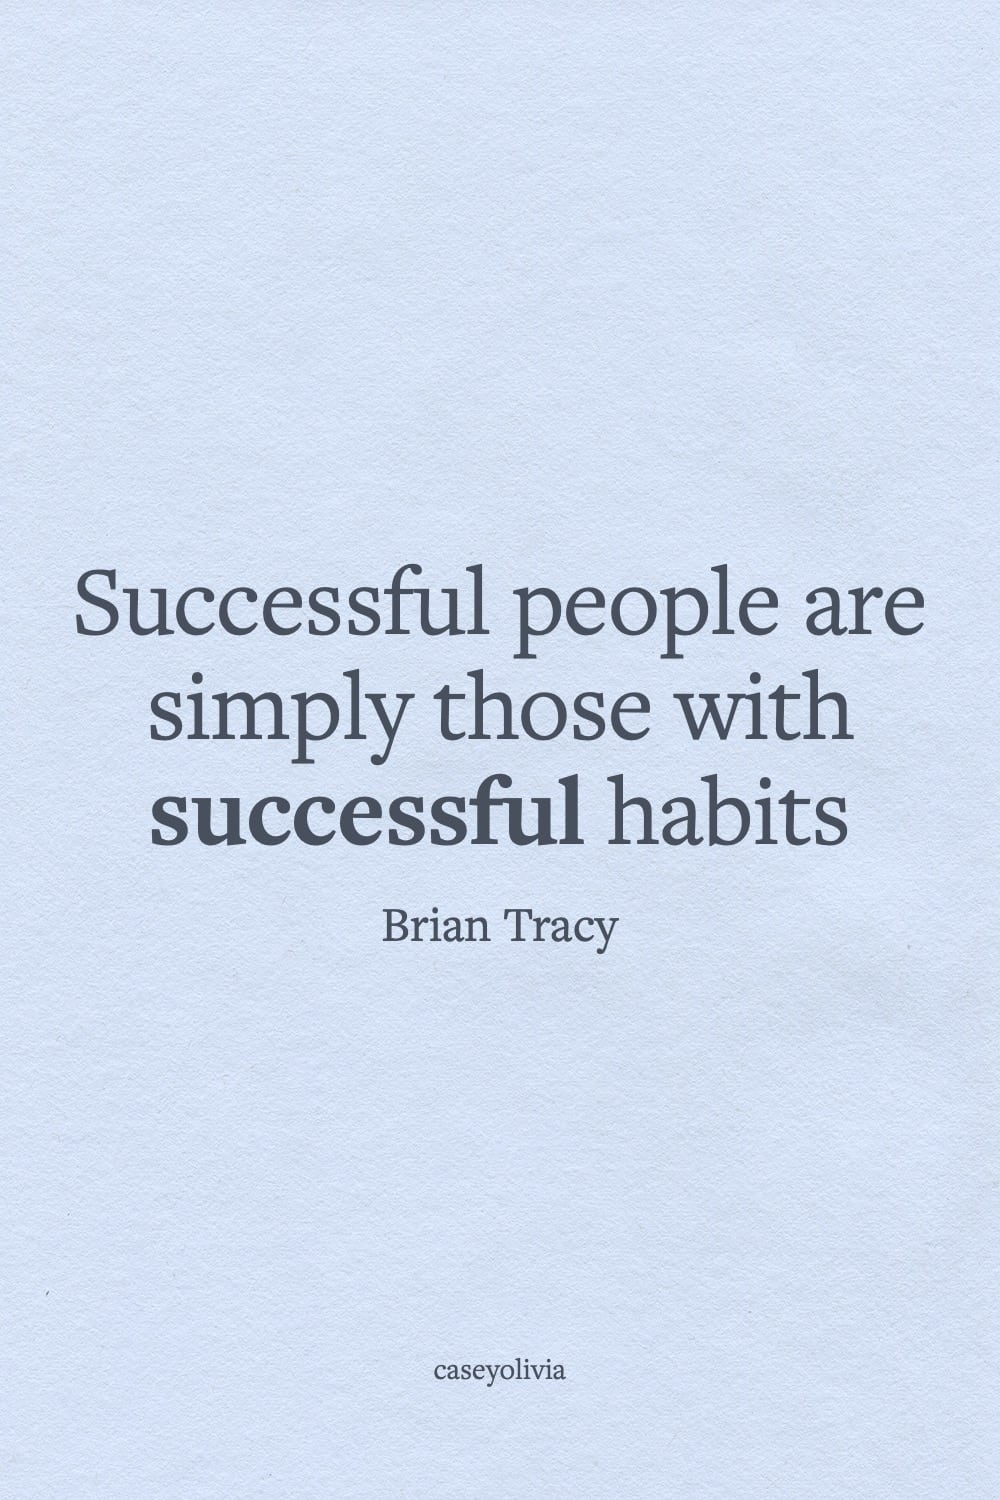 successful people brian tracy quote image to share